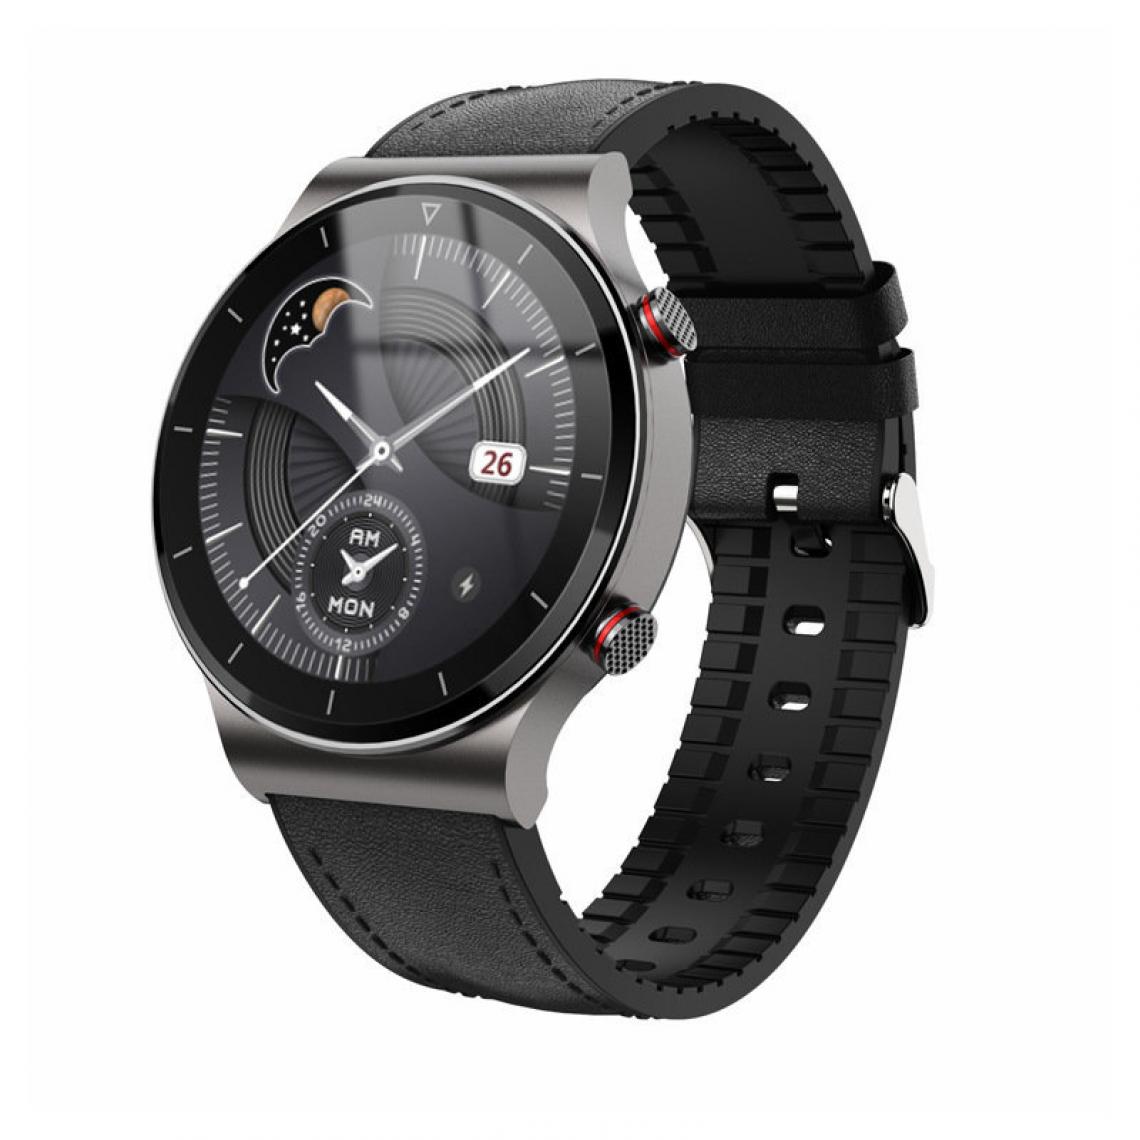 Chronotech Montres - Luxury Men Smart Watch Smart Watch Touch Full Screen Bluetooth Call Heart Rate Tracking IP67 waterproof for Men(black) - Montre connectée